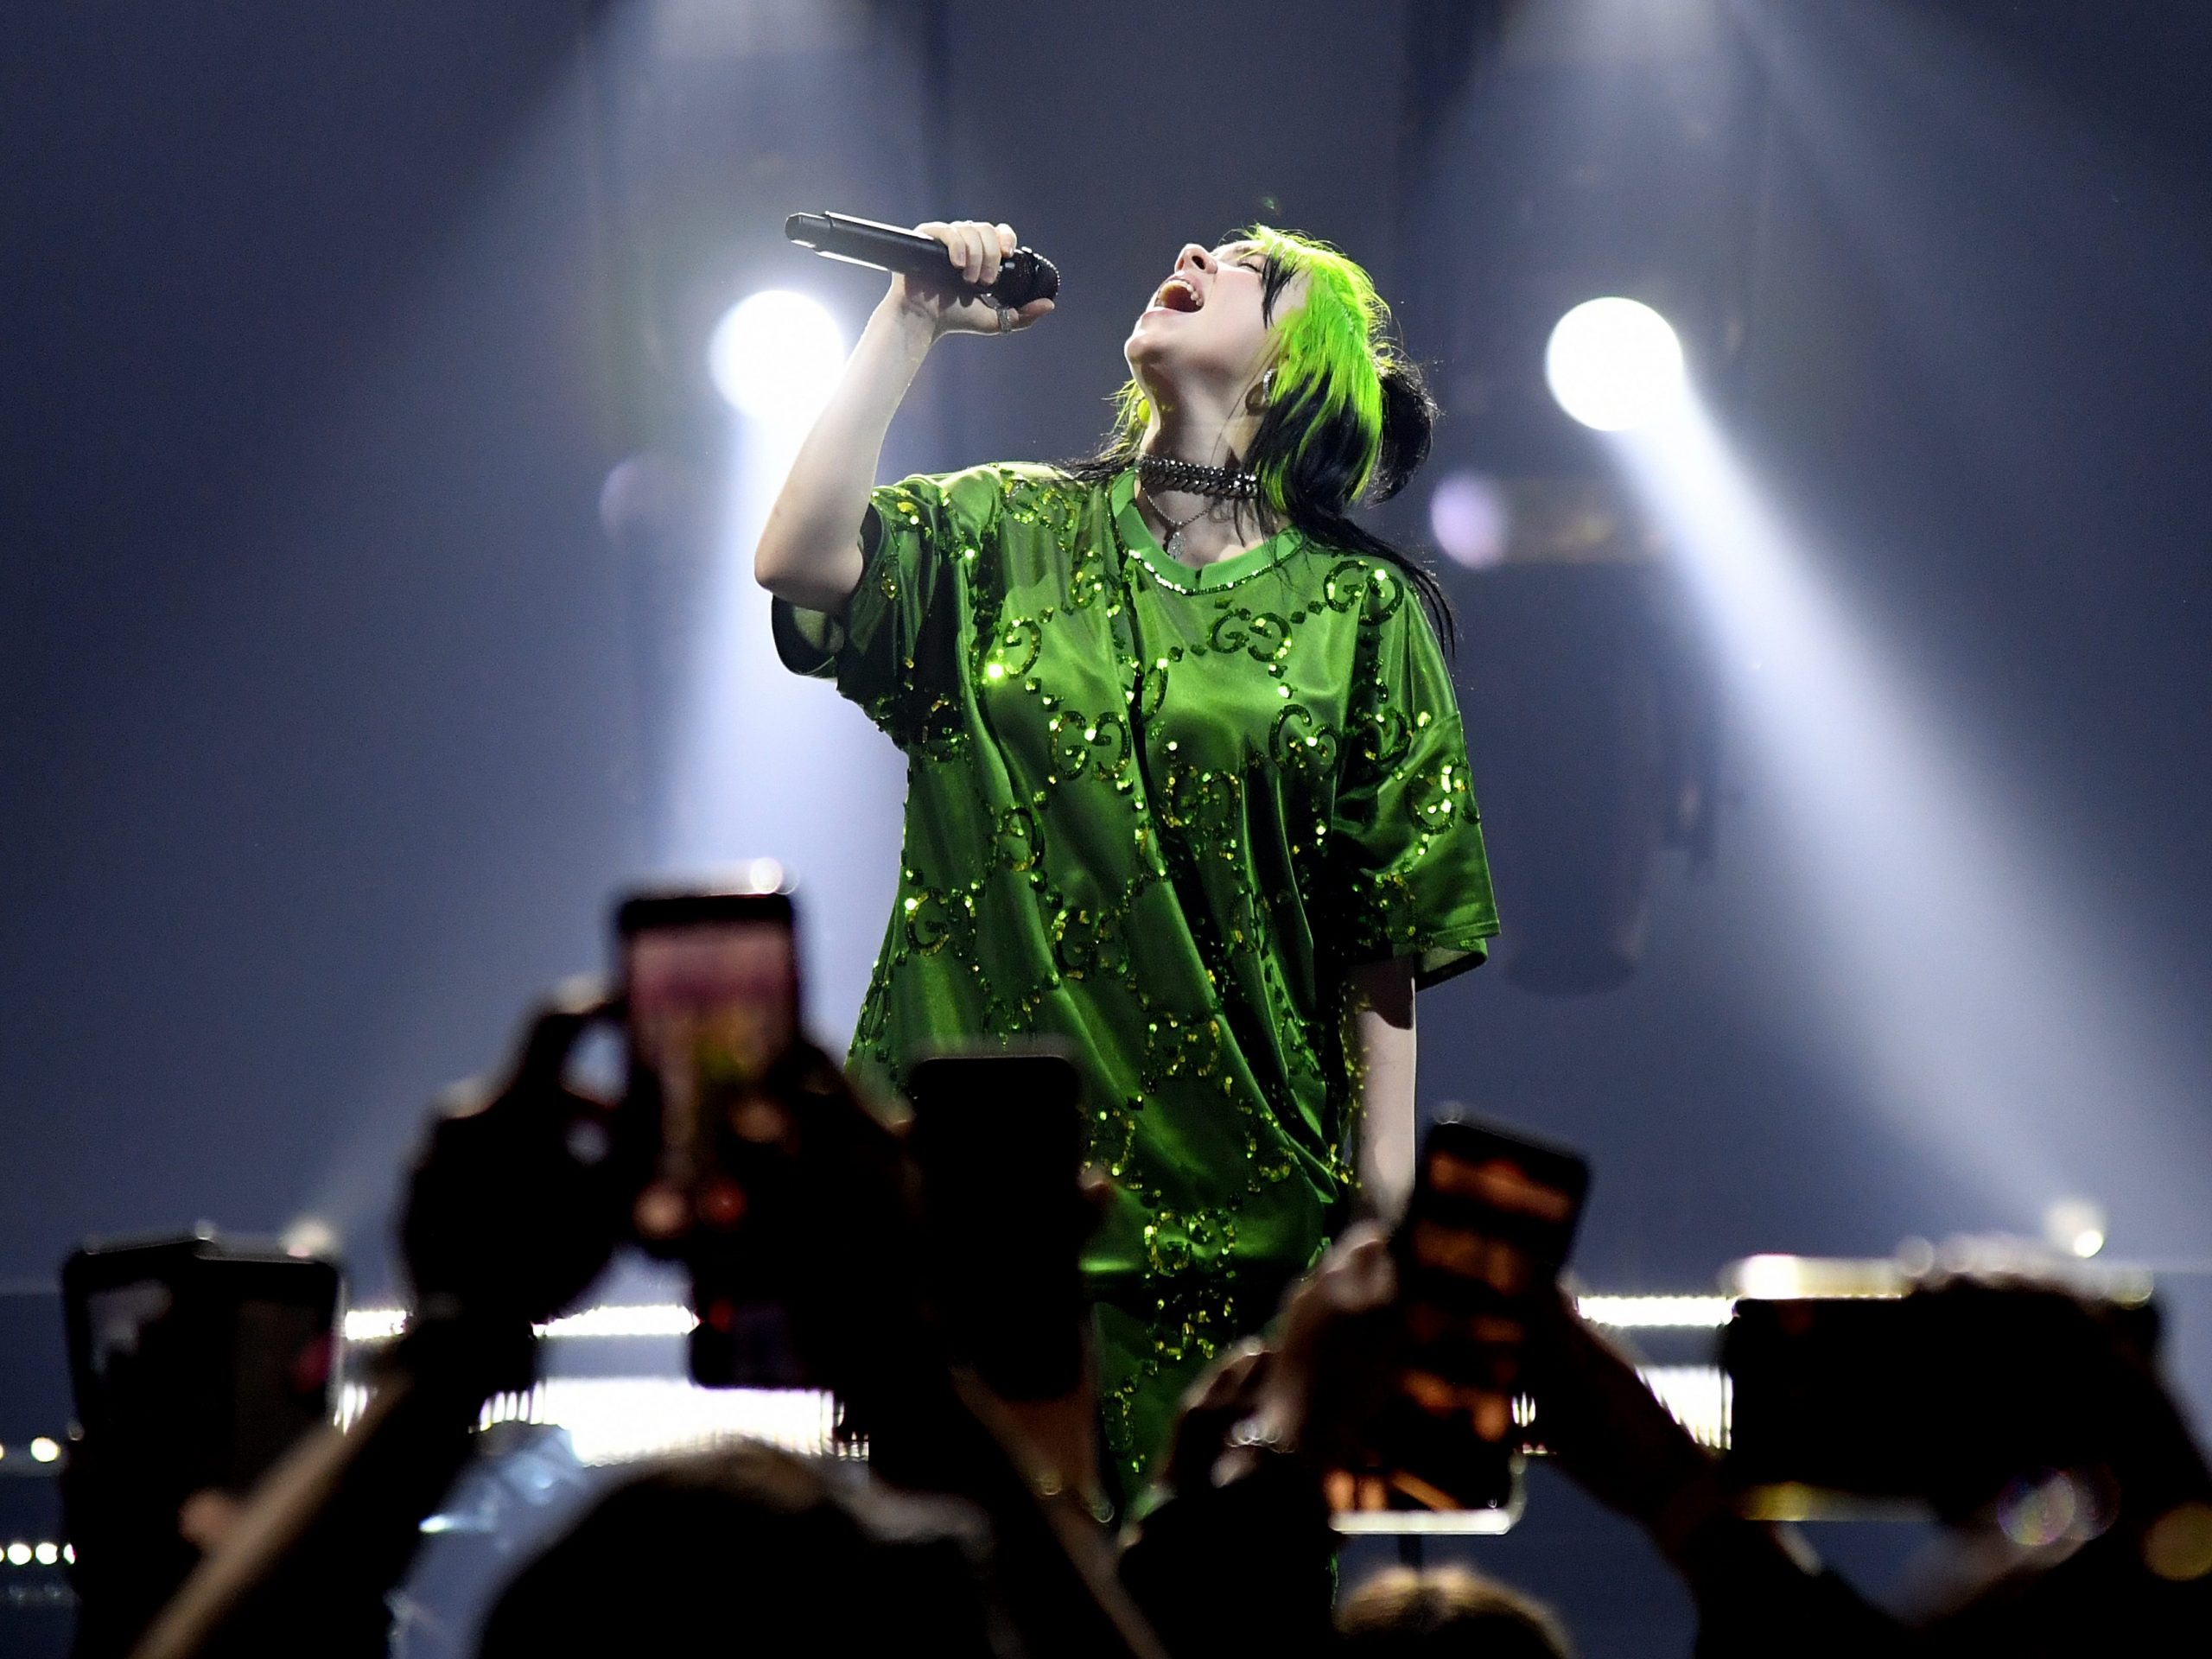 Billie Eilish wears a green shirt as she performs during her Where Do We Go?" World Tour Kick Off - Miami